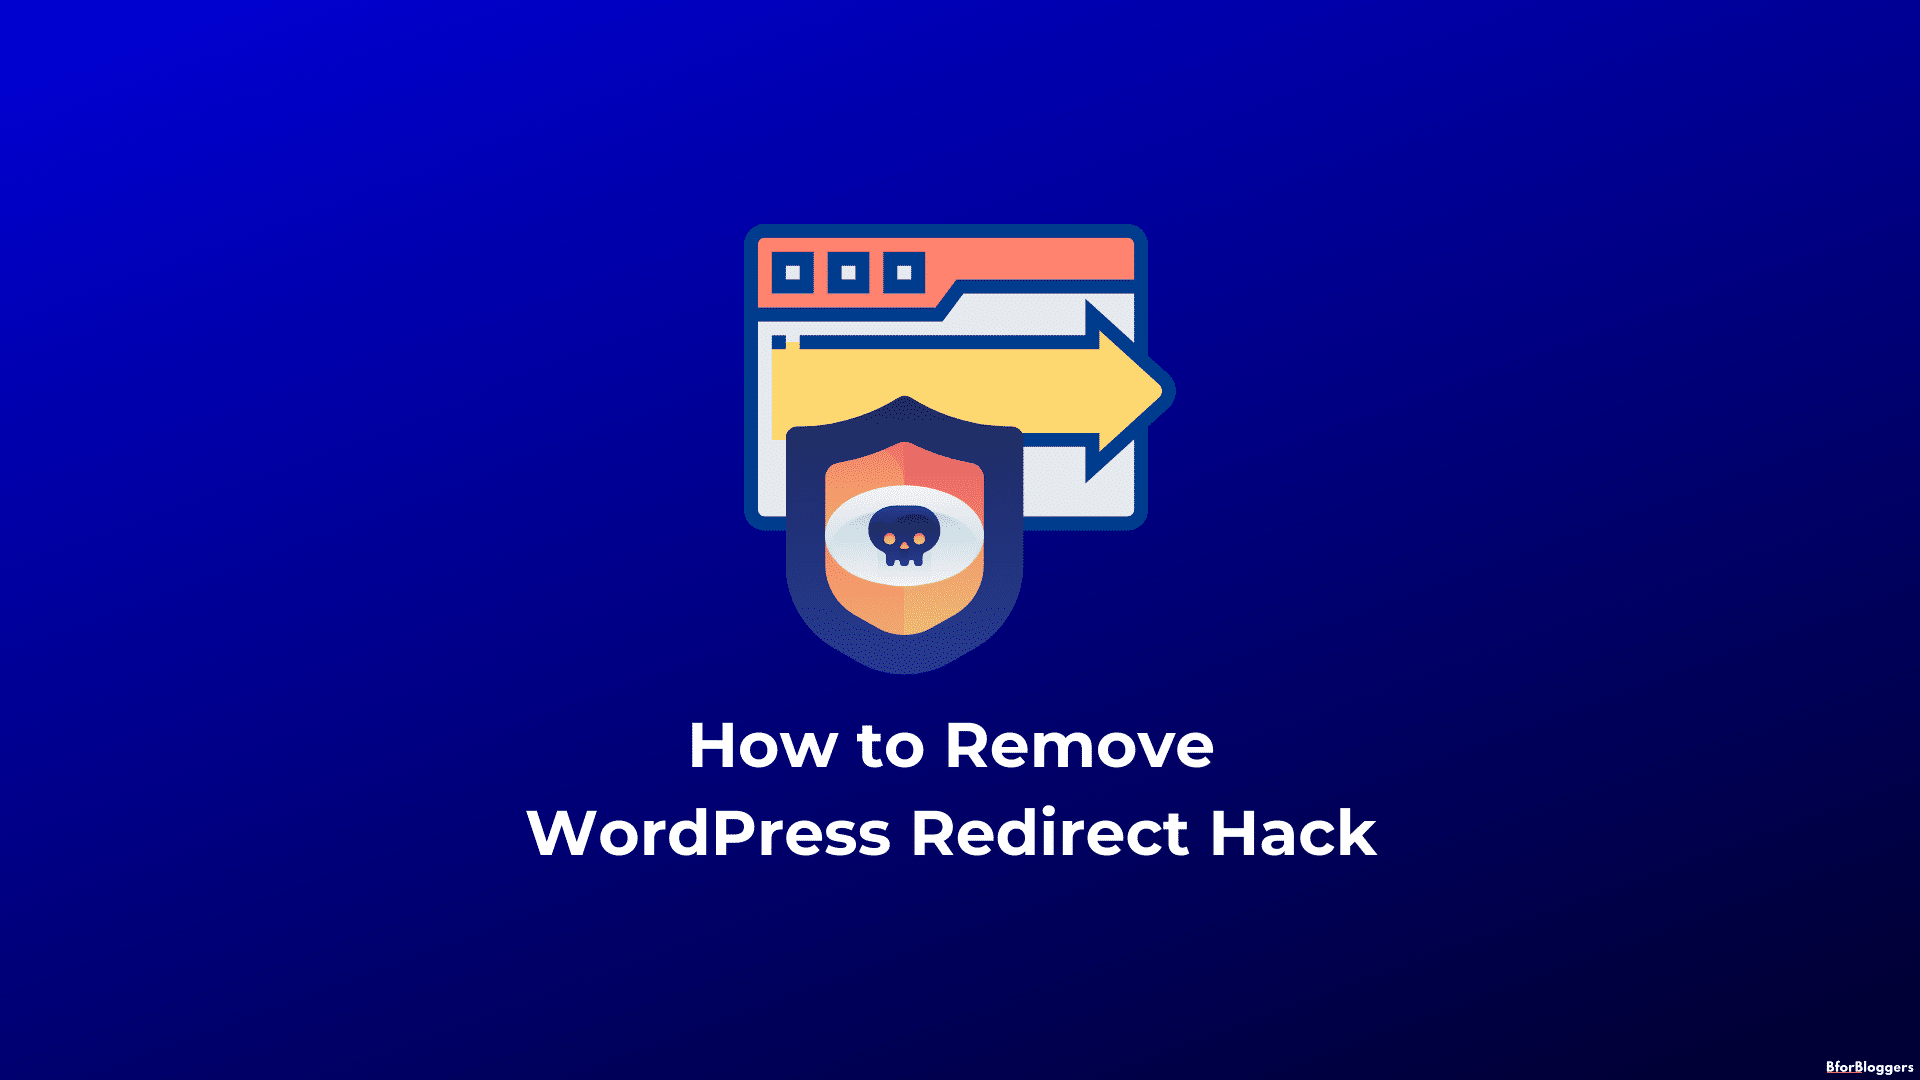 What is a WordPress Redirect Hack & How to Remove It